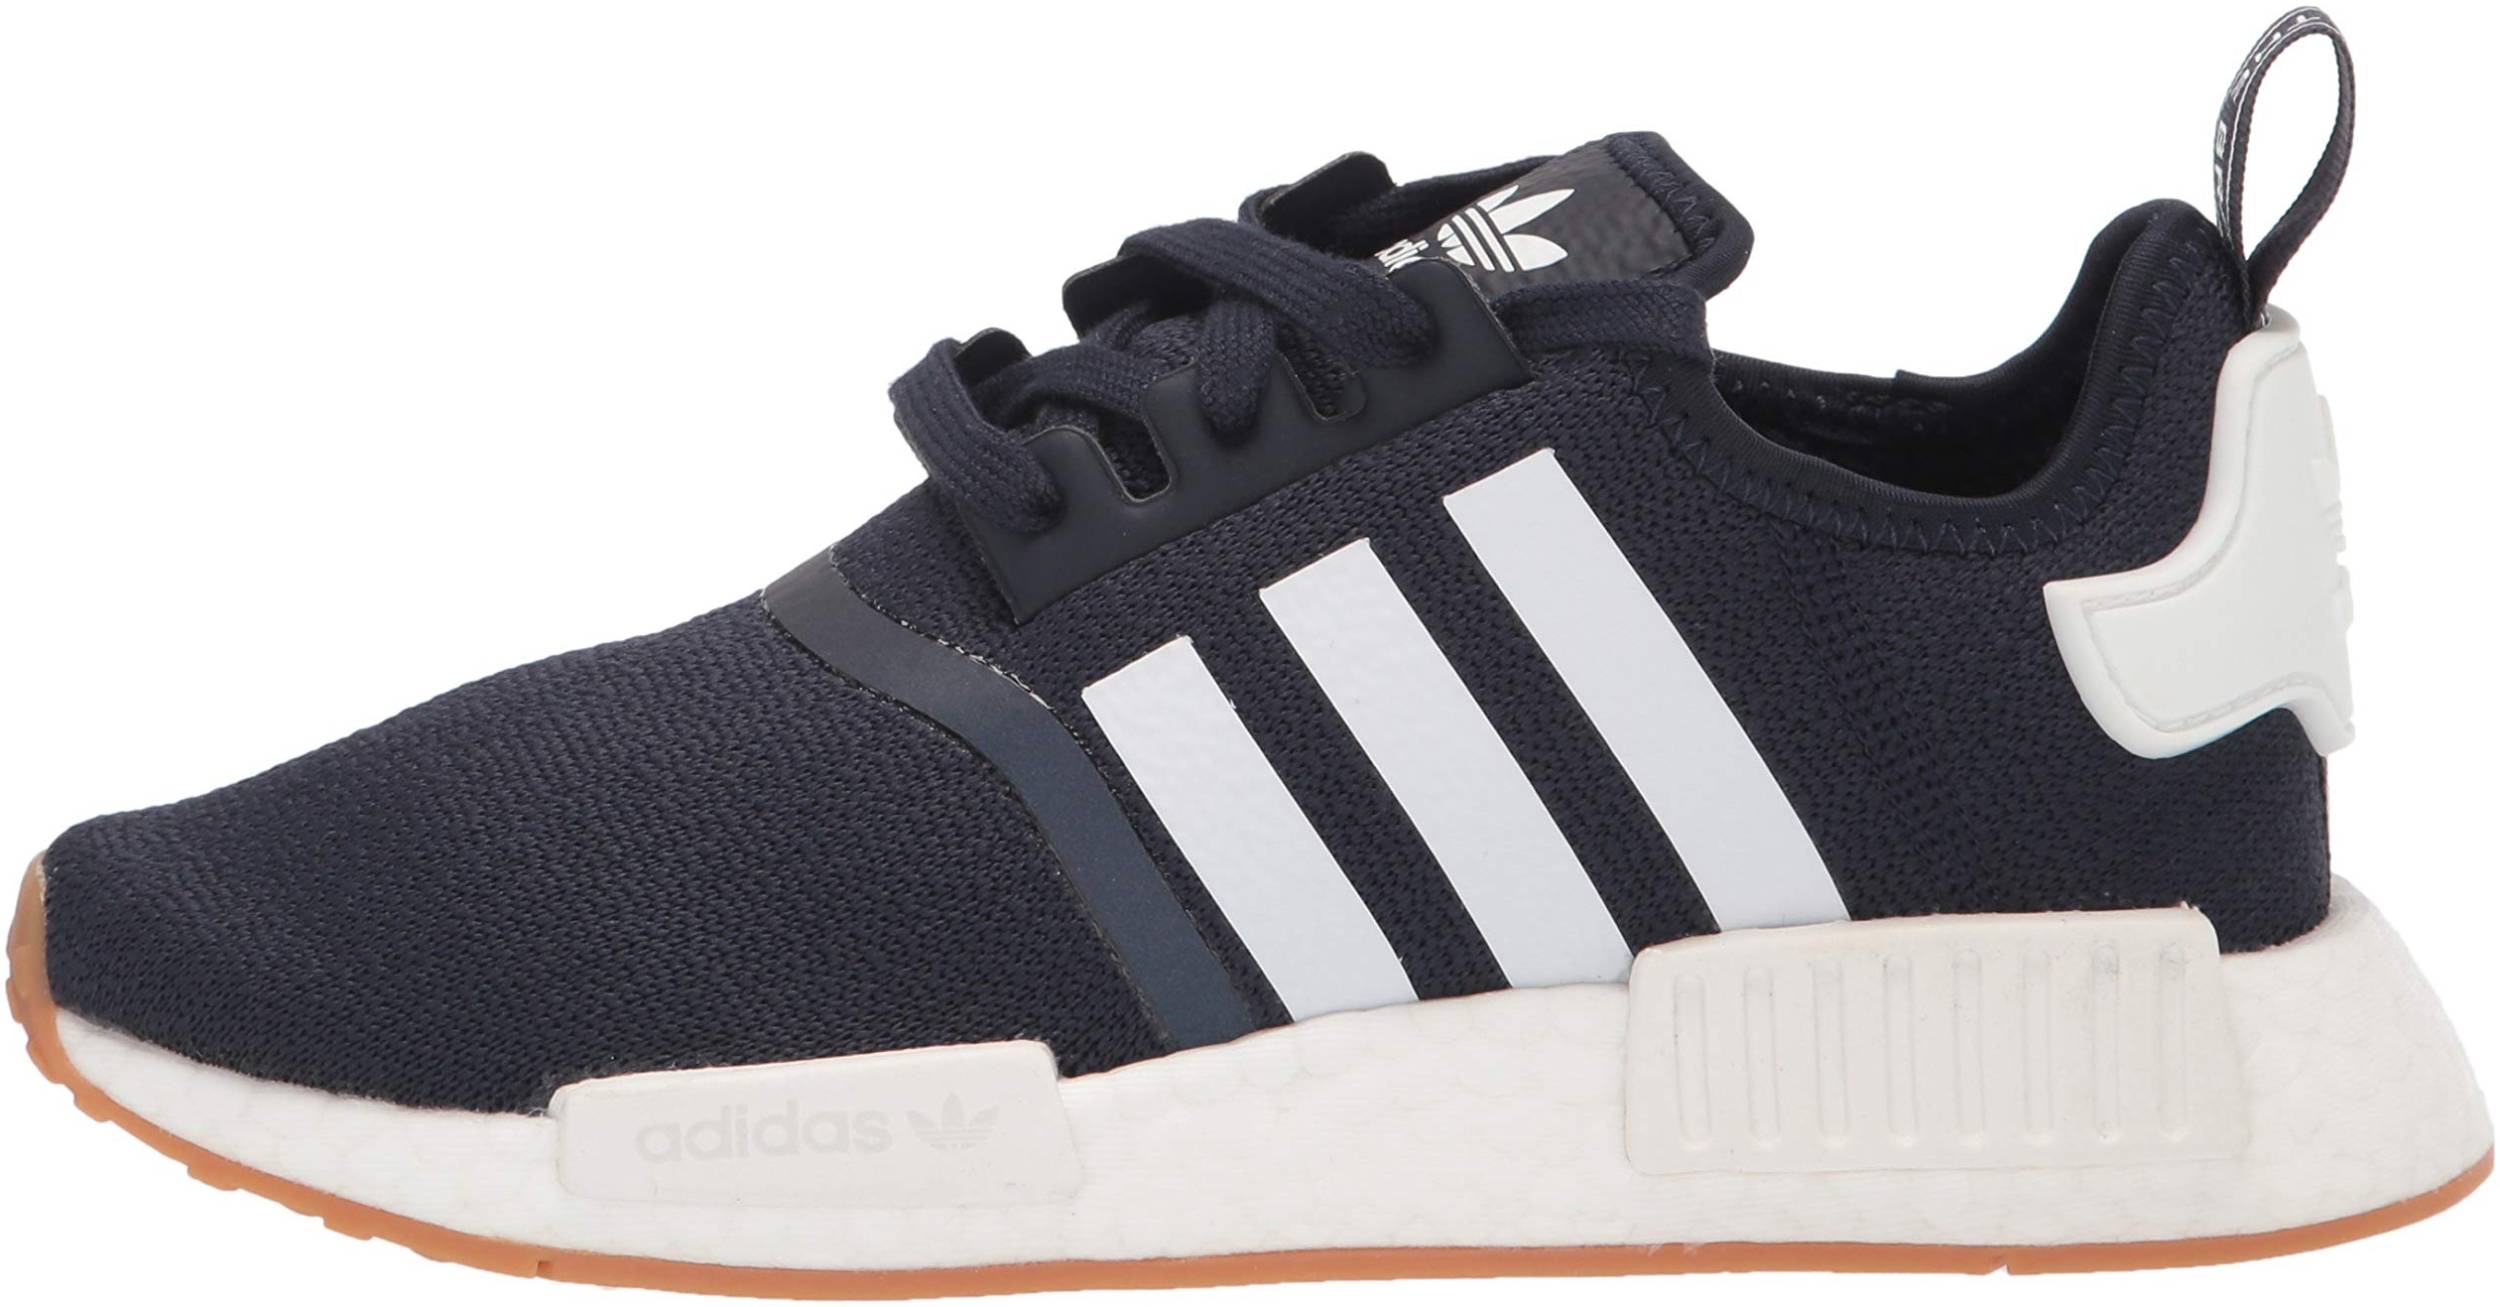 20+ Adidas NMD sneakers: Save up to |